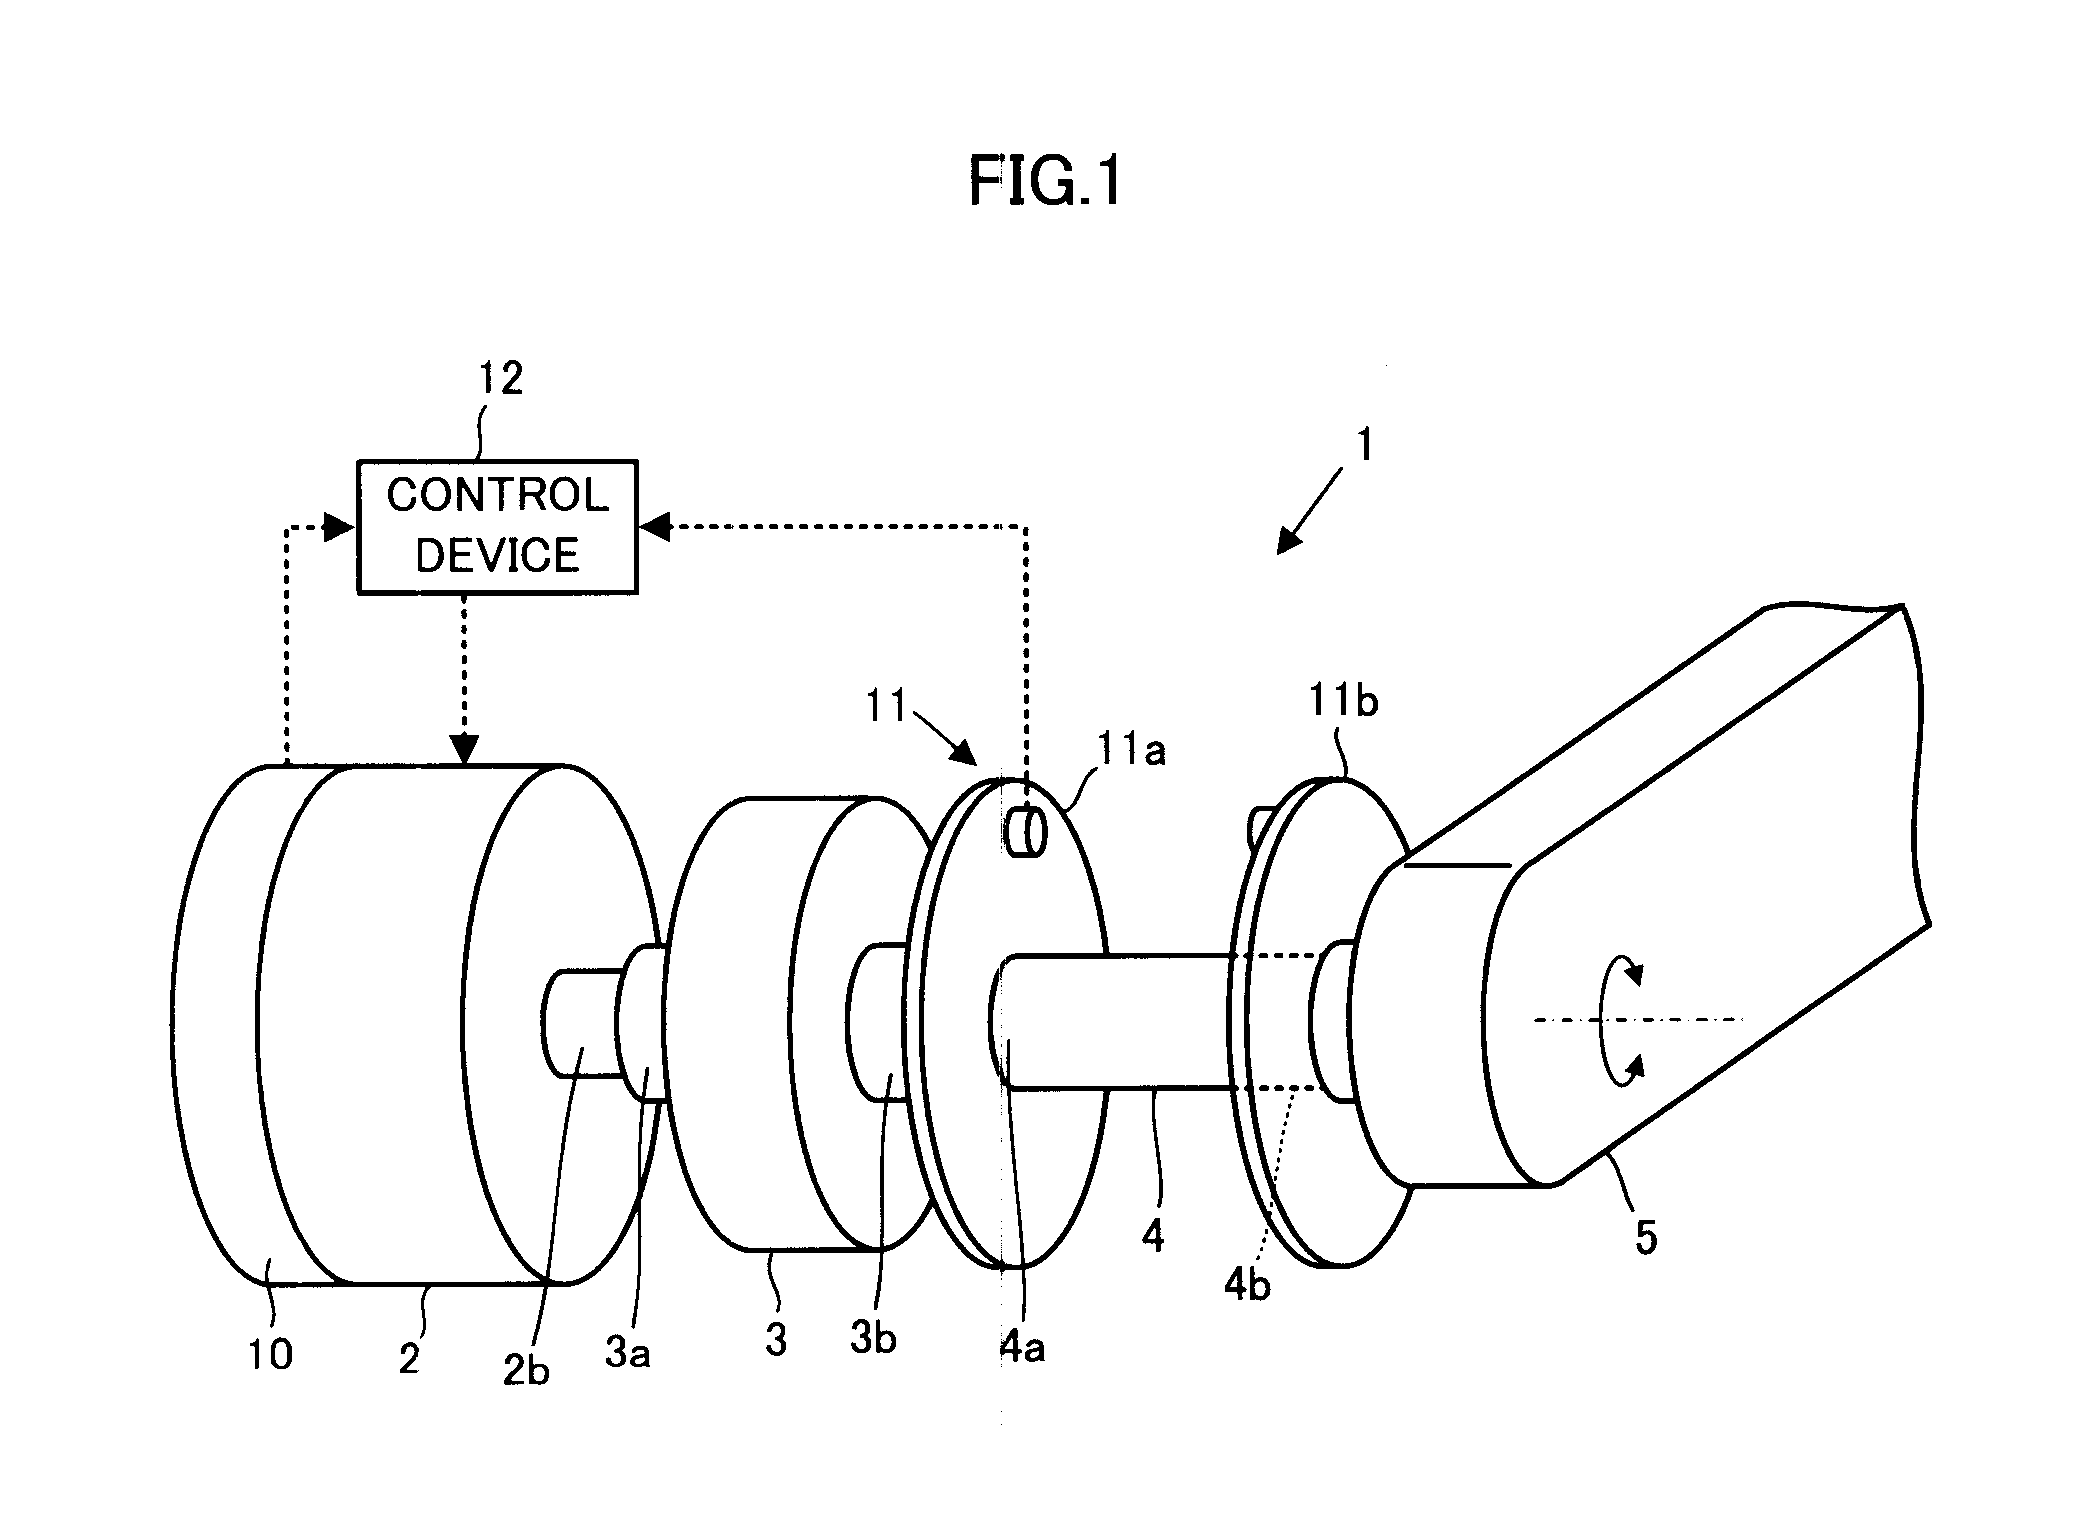 Control device for power device